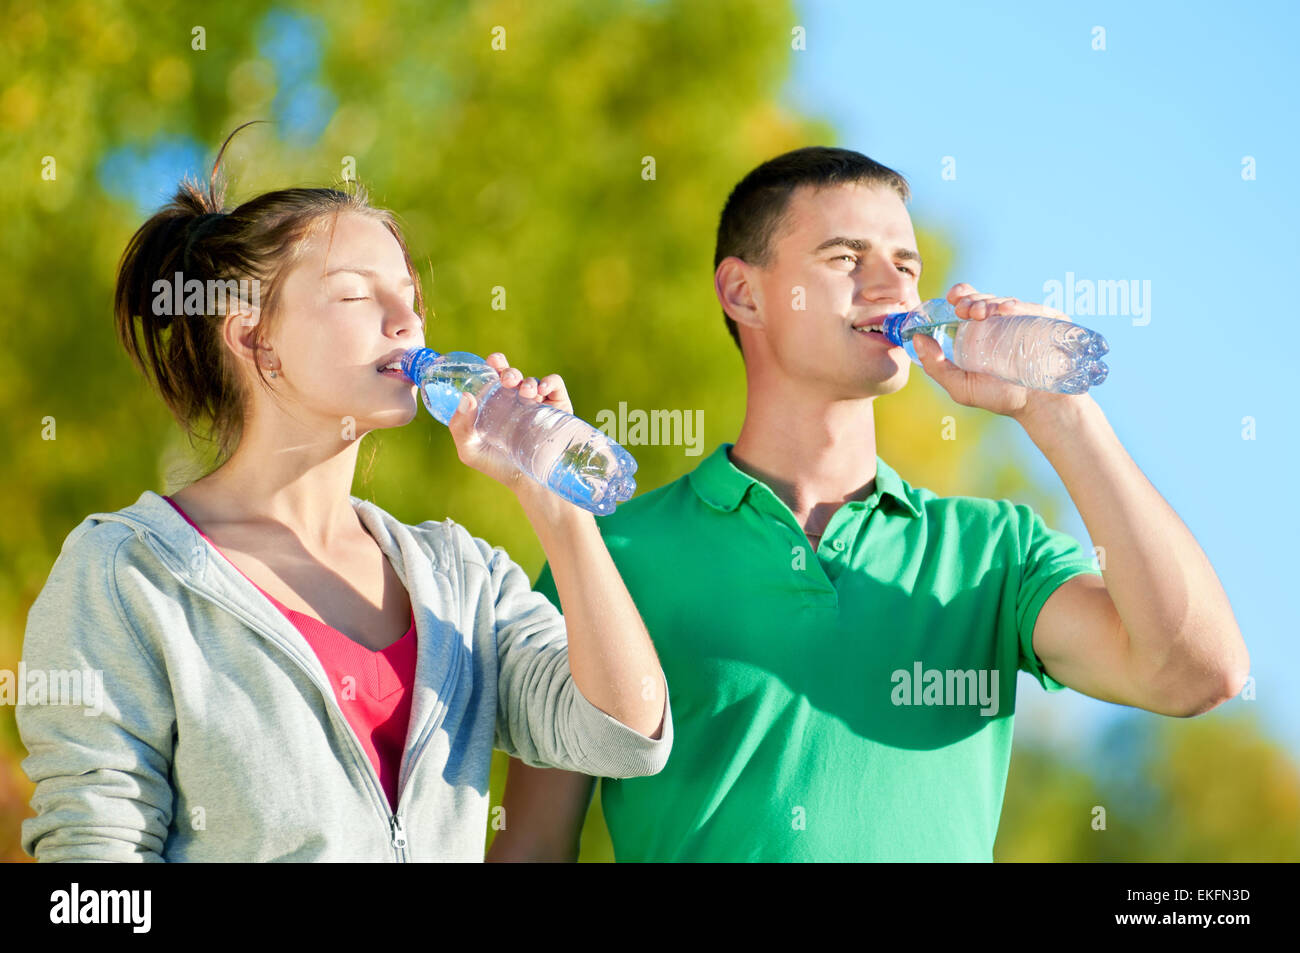 Teen boy wiping his brow and drinking water from a bottle, Stock image